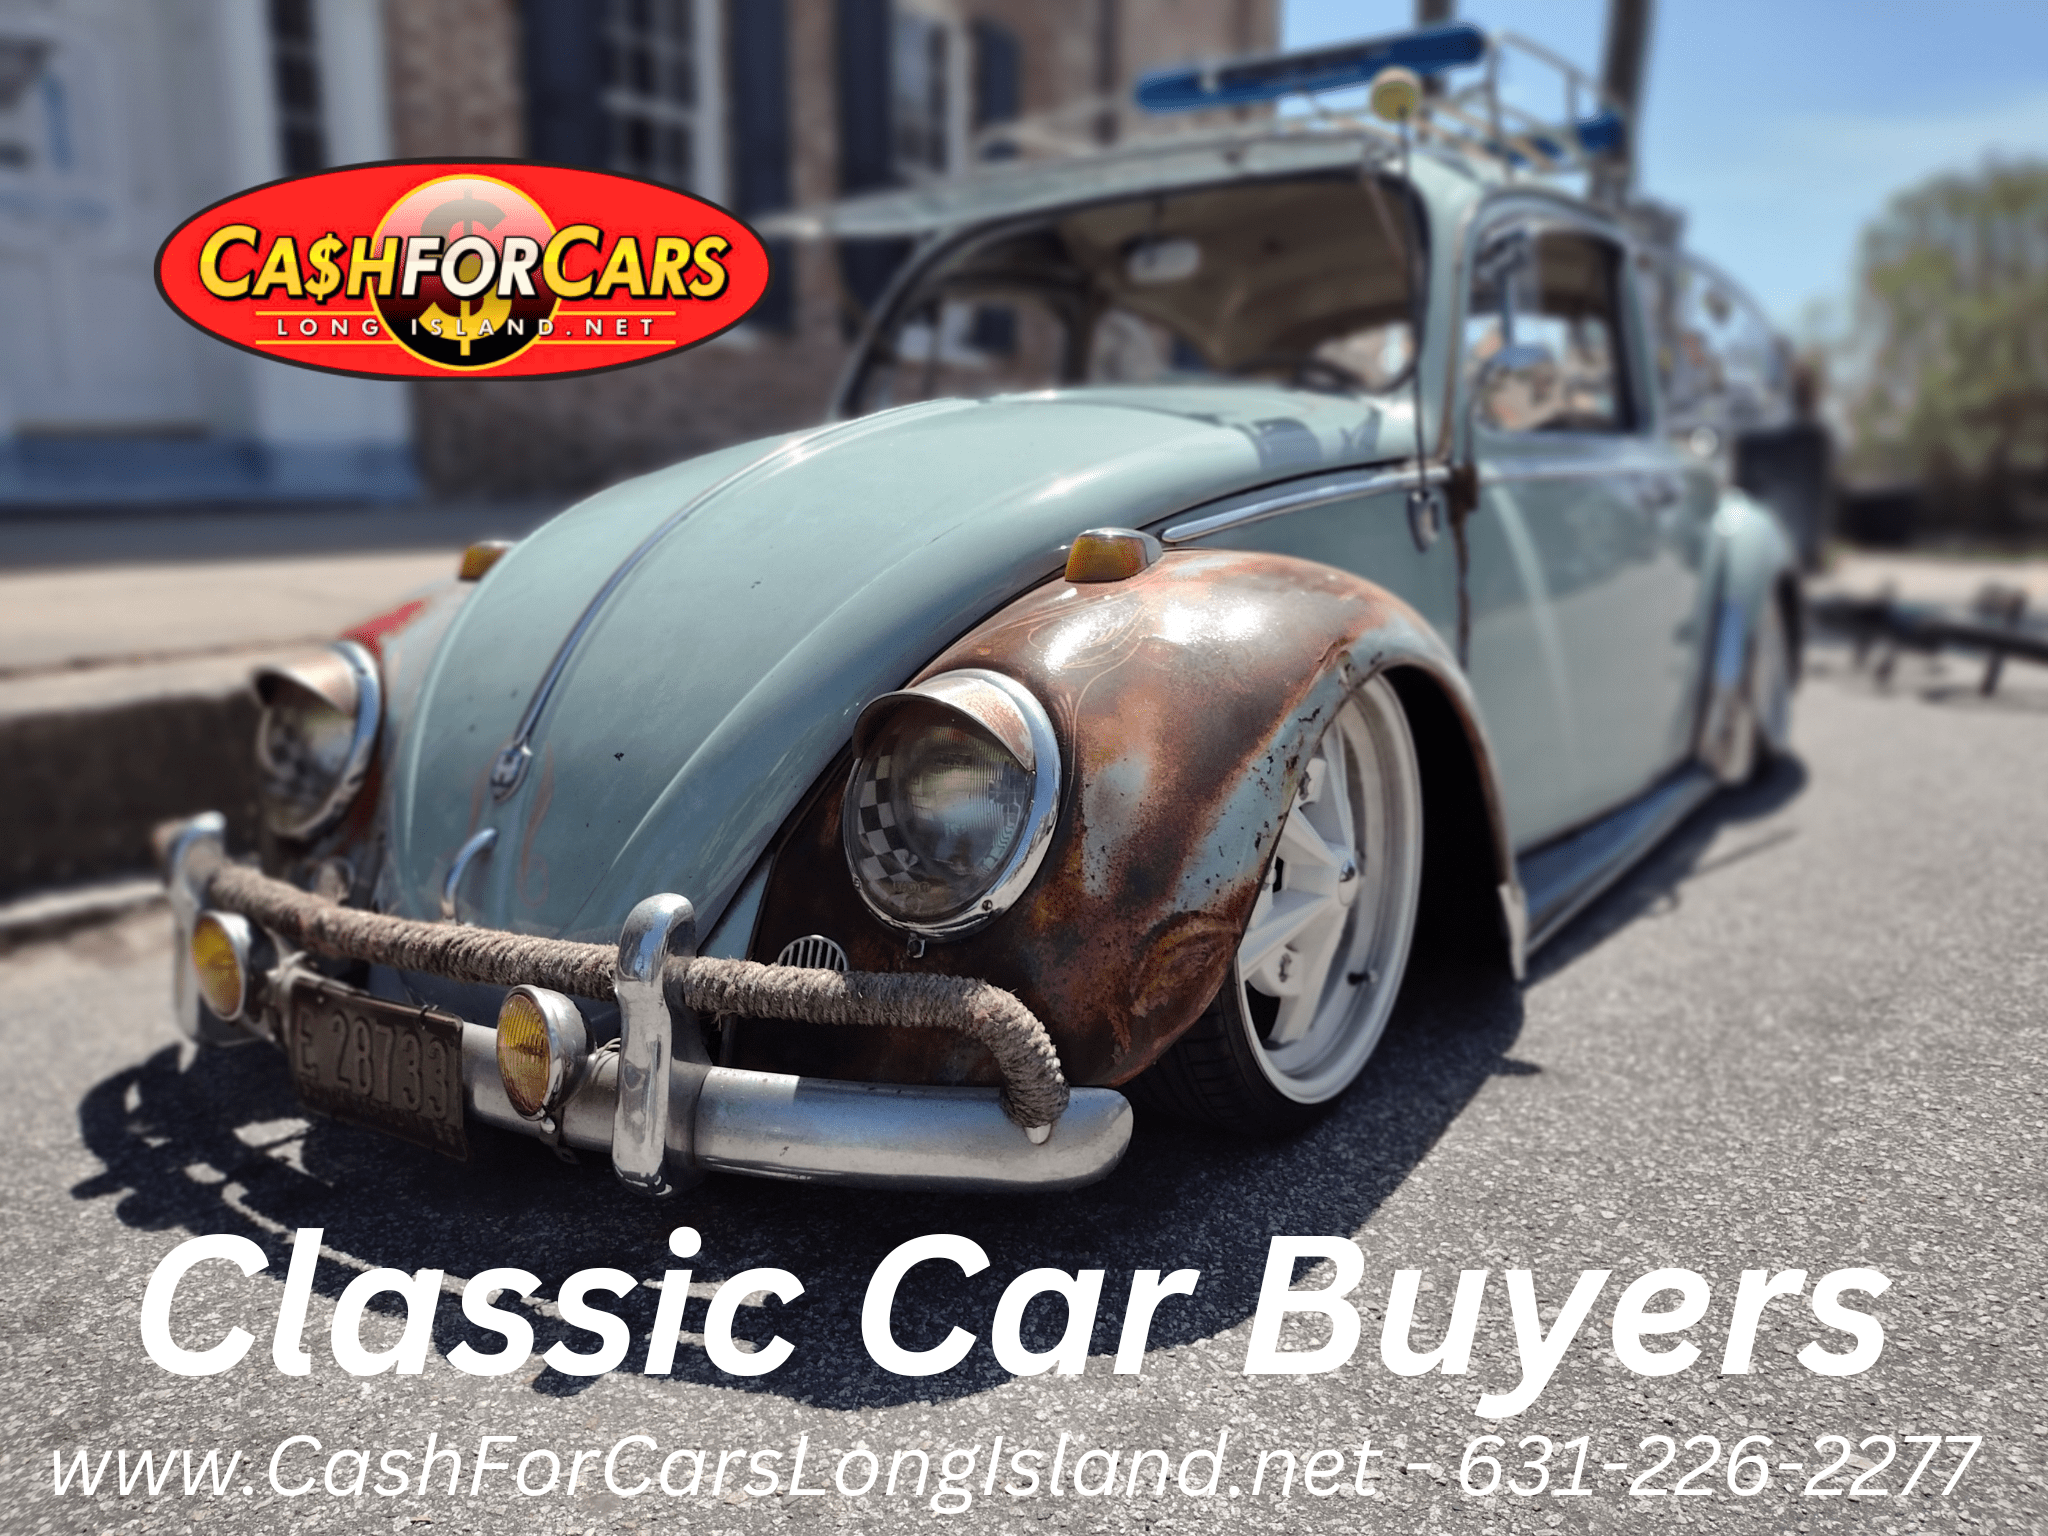 Sell A Classic car